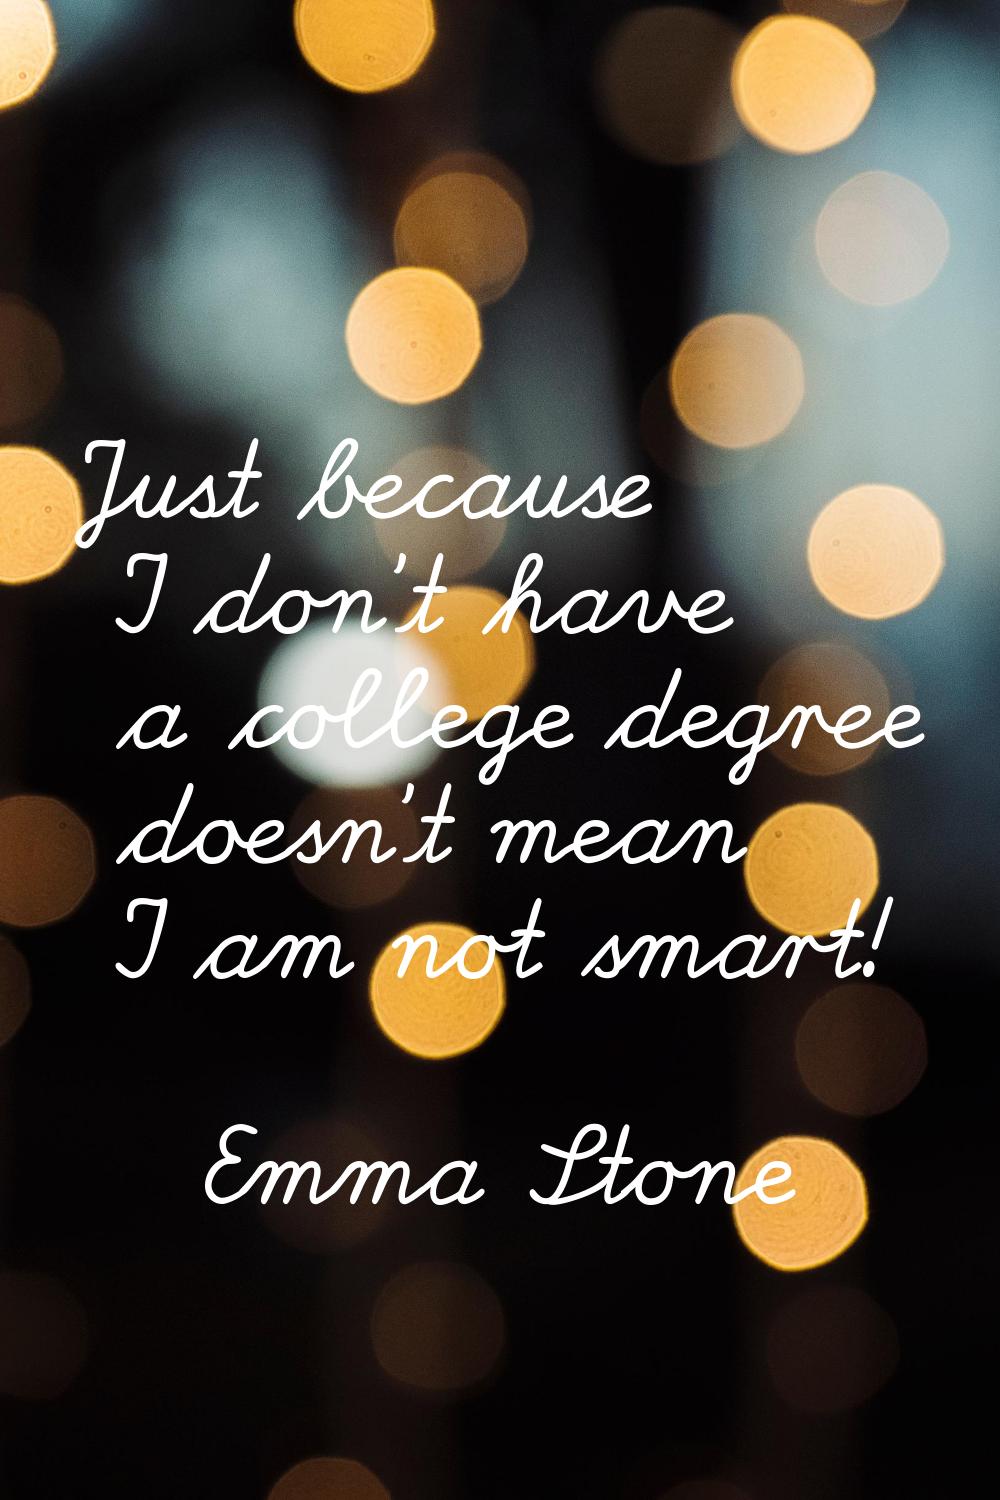 Just because I don't have a college degree doesn't mean I am not smart!